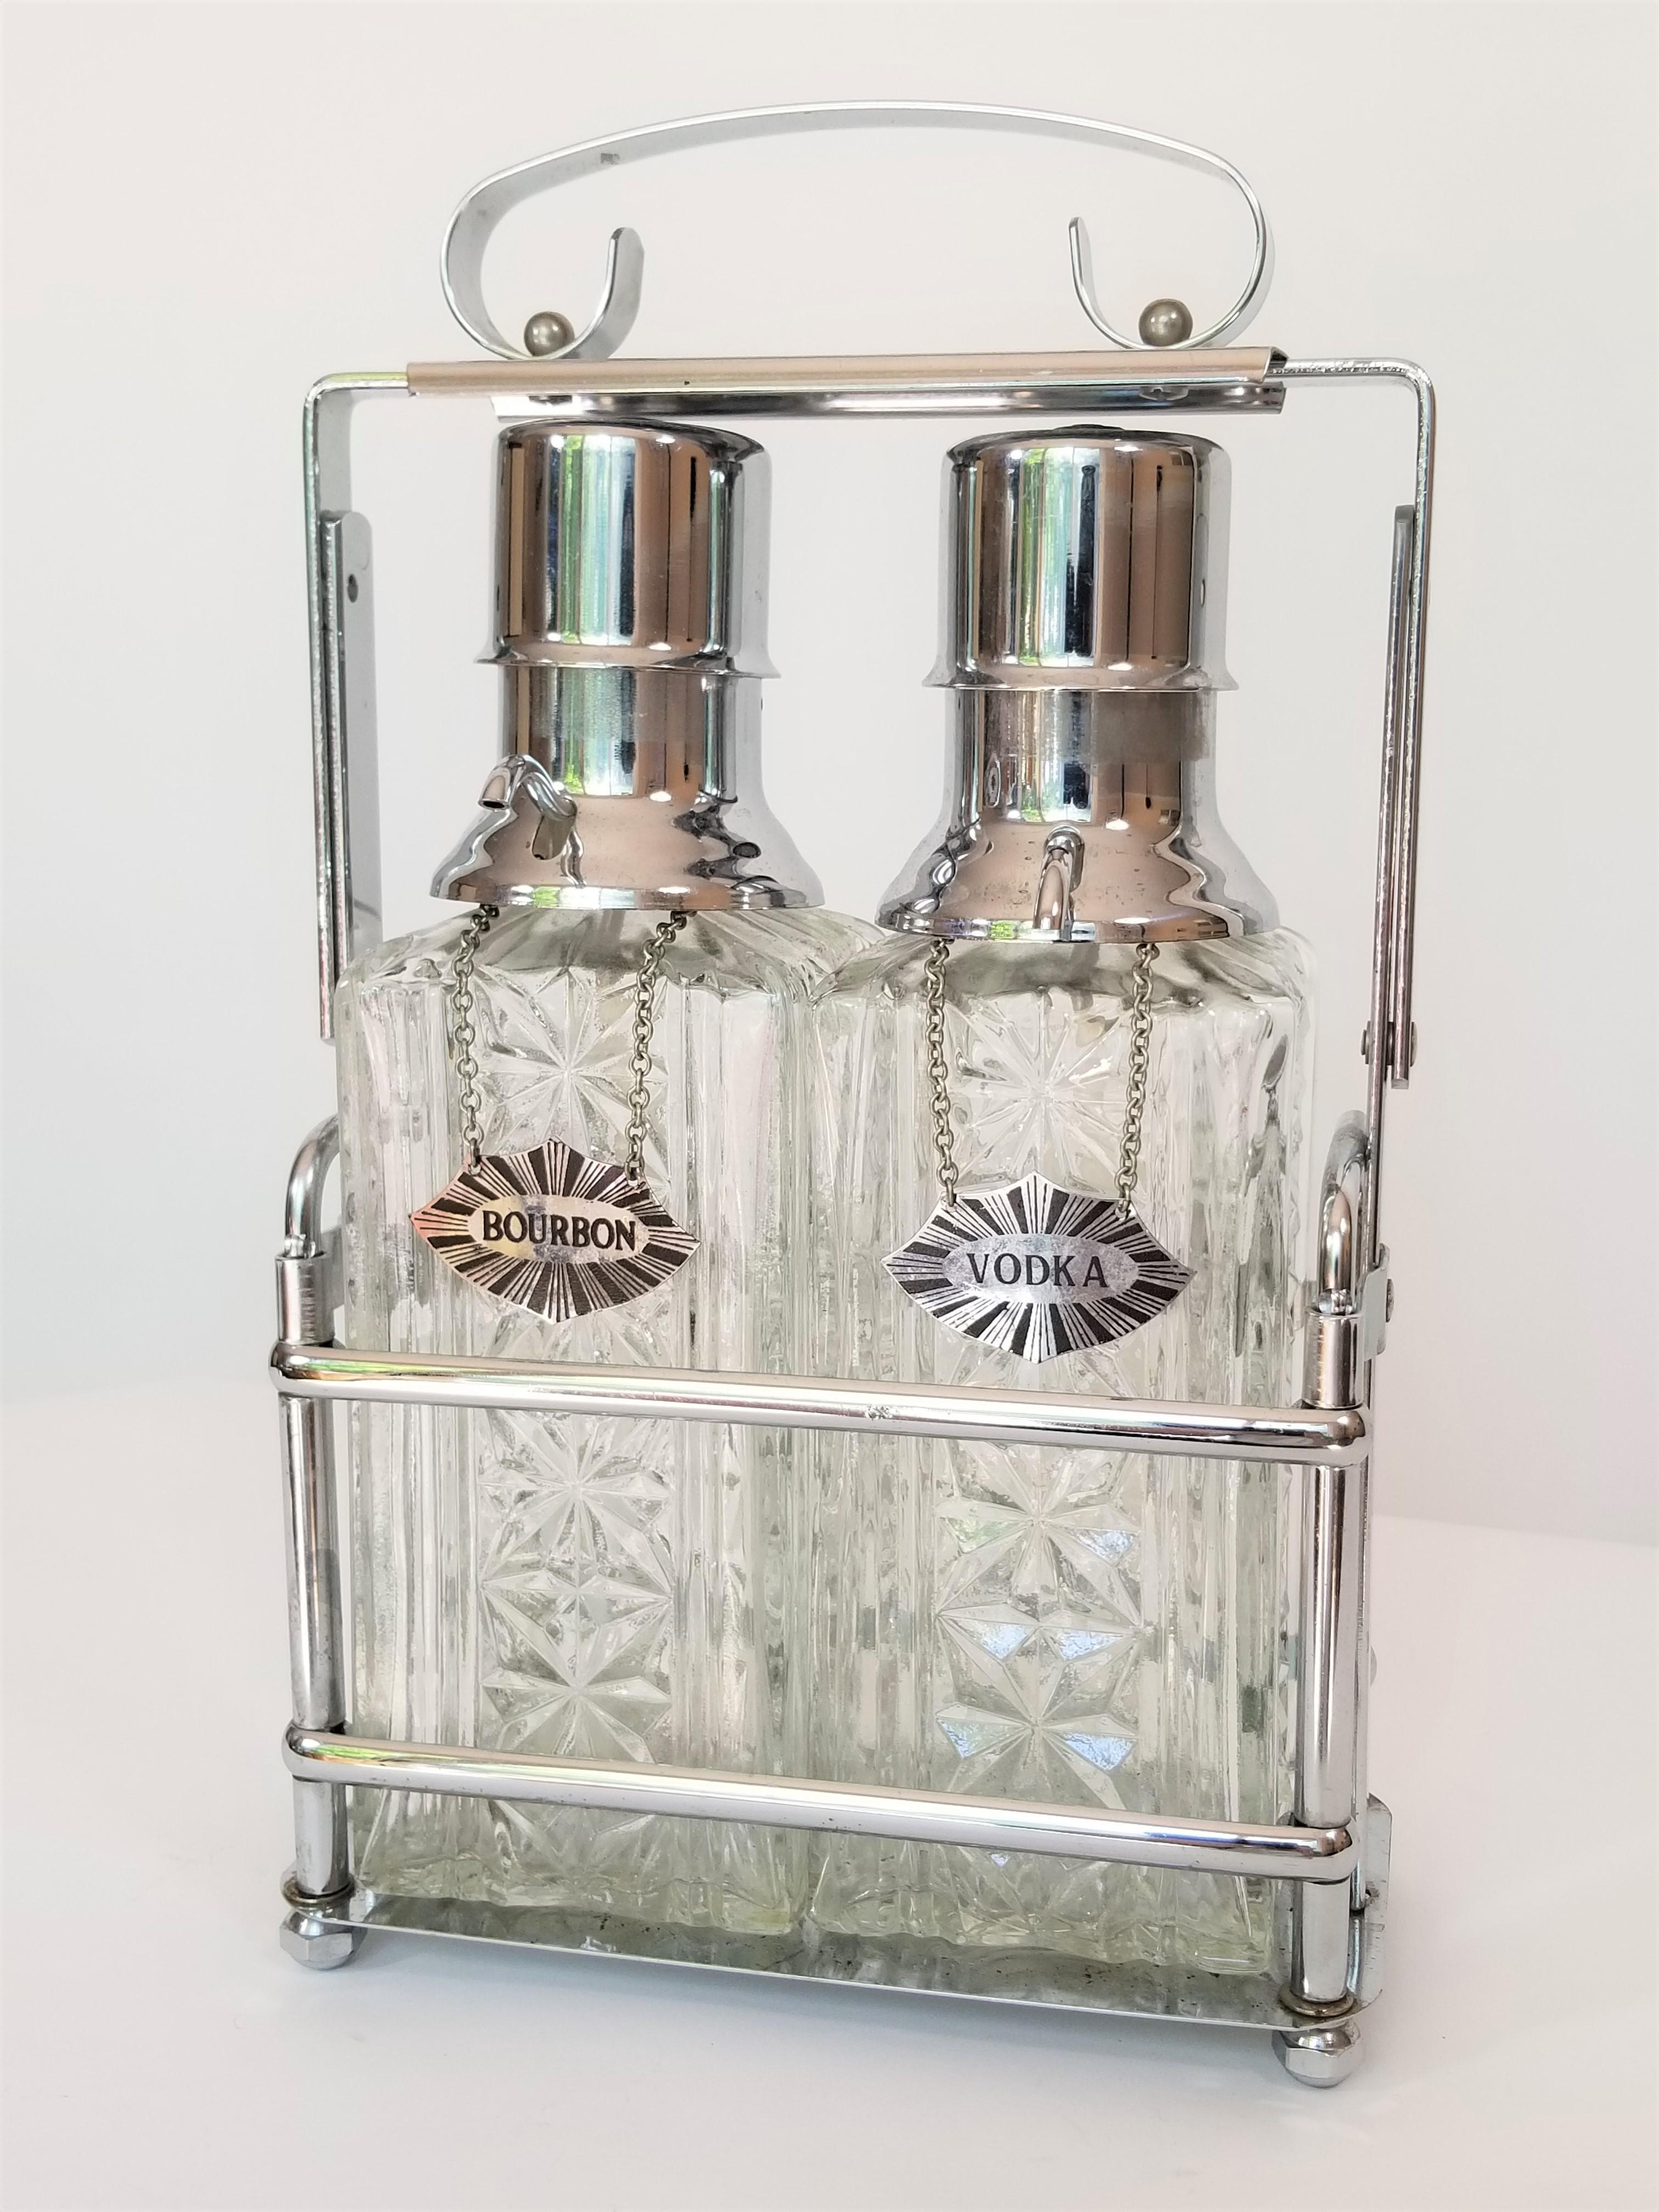 Midcentury 1960s pair of decanters. Chrome caddy holder with handle. Both decanters have a screw on pump top. Metal tags for vodka and bourbon. Sturdy thick decorative glass. Decanters are both in excellent condition. Chrome caddy exhibits some wear